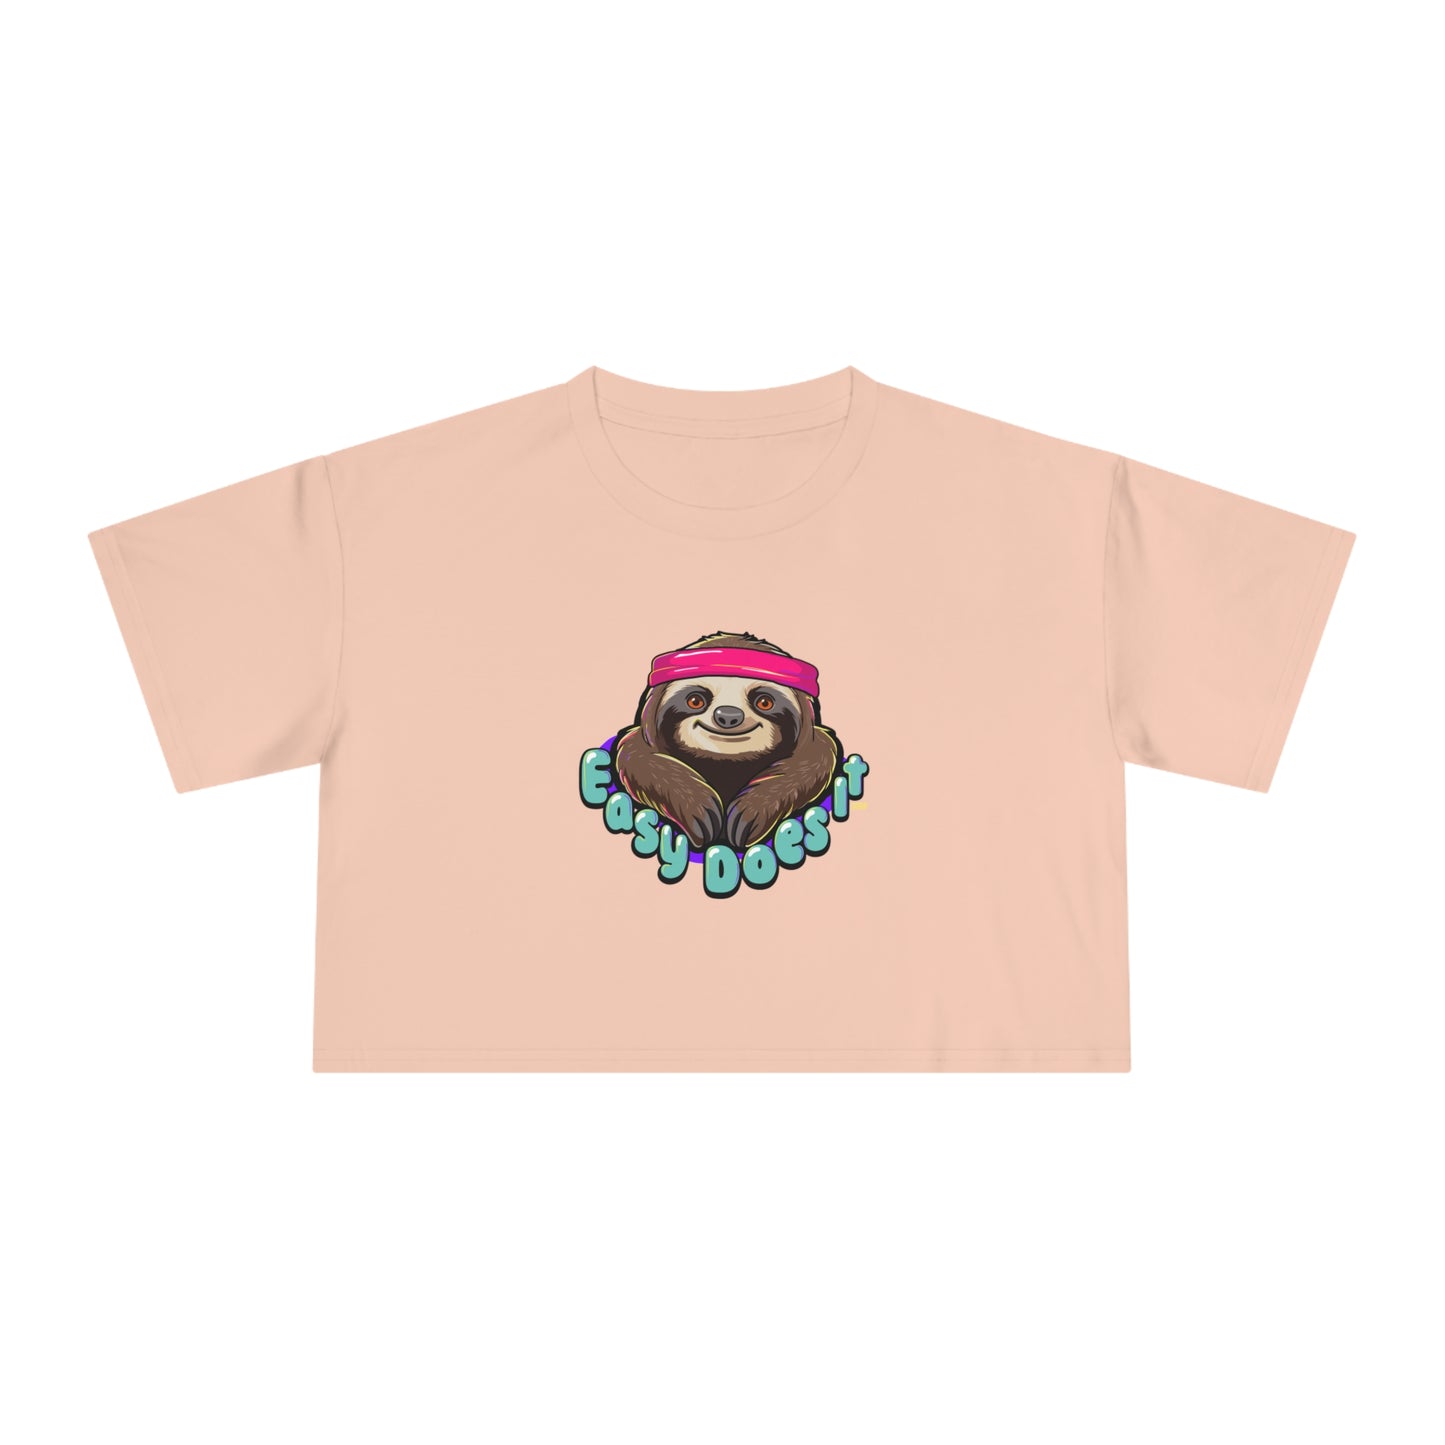 WOMENS BOXFIT EASY DOES IT SLOTH CROPPED TEE